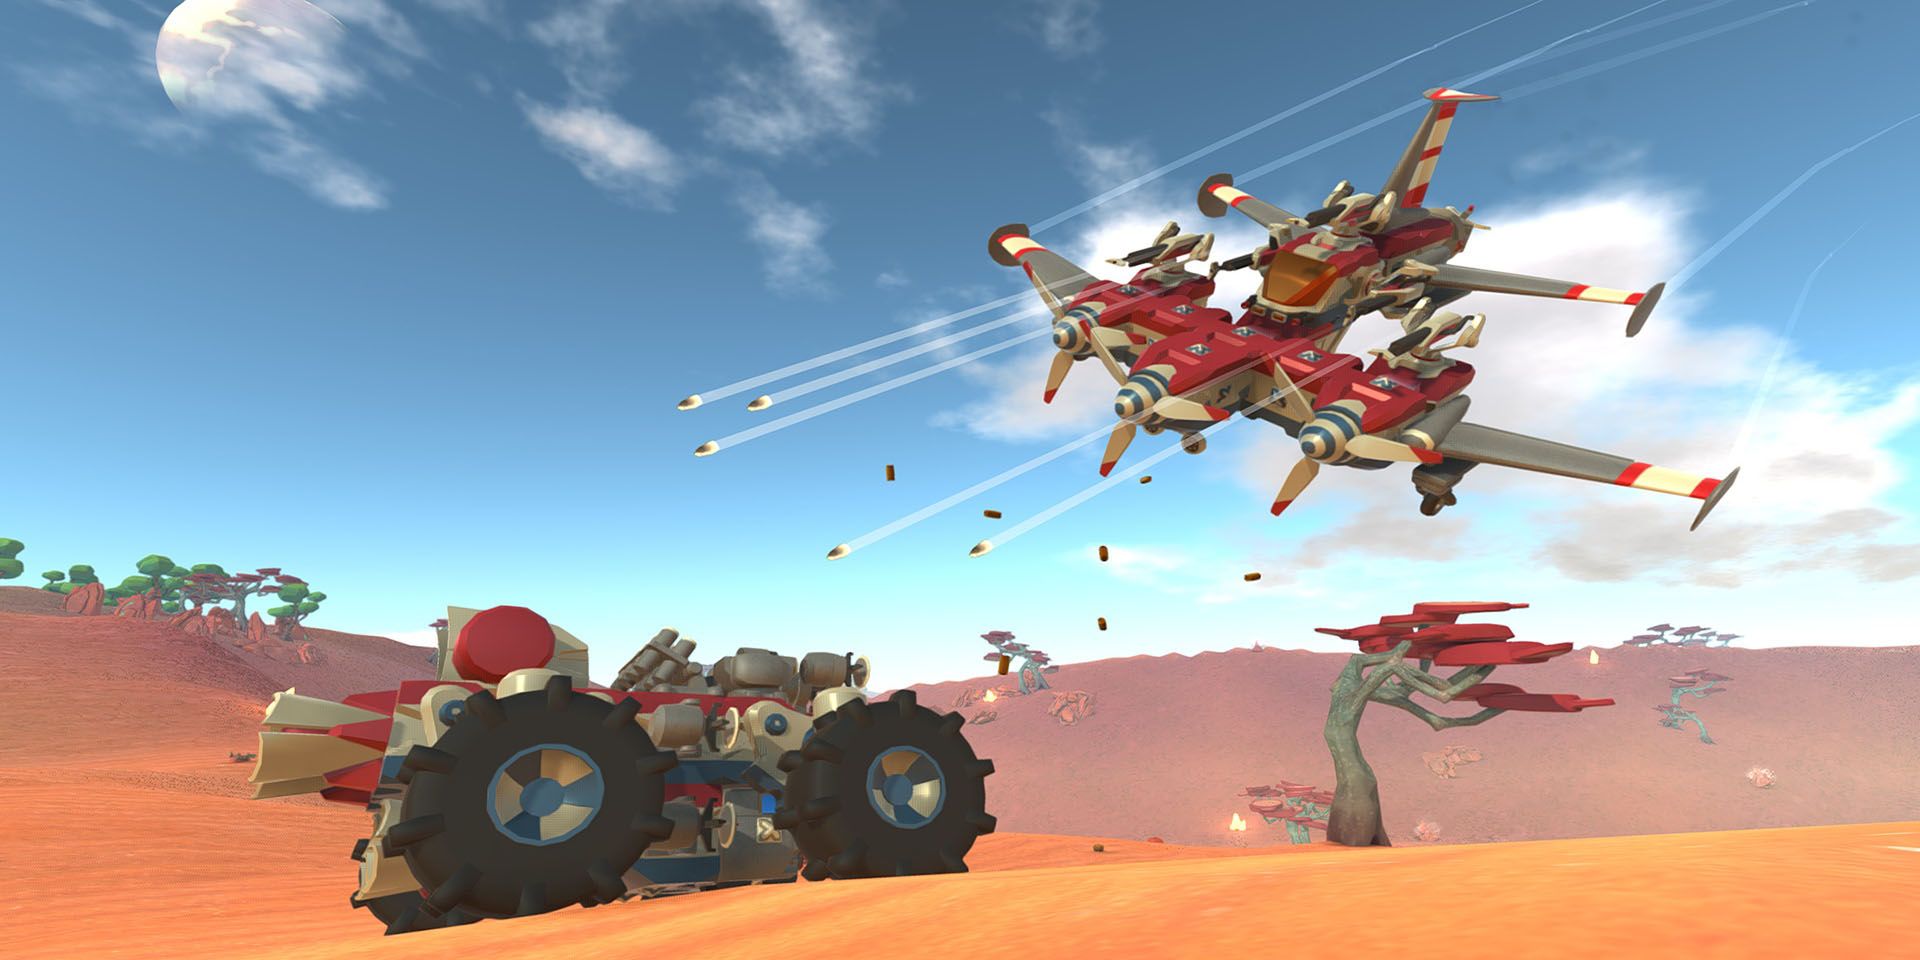 Terratech promo image showing two player made vehicles, a jet propelled car and a plane with three propellors, battling over a sandy environment